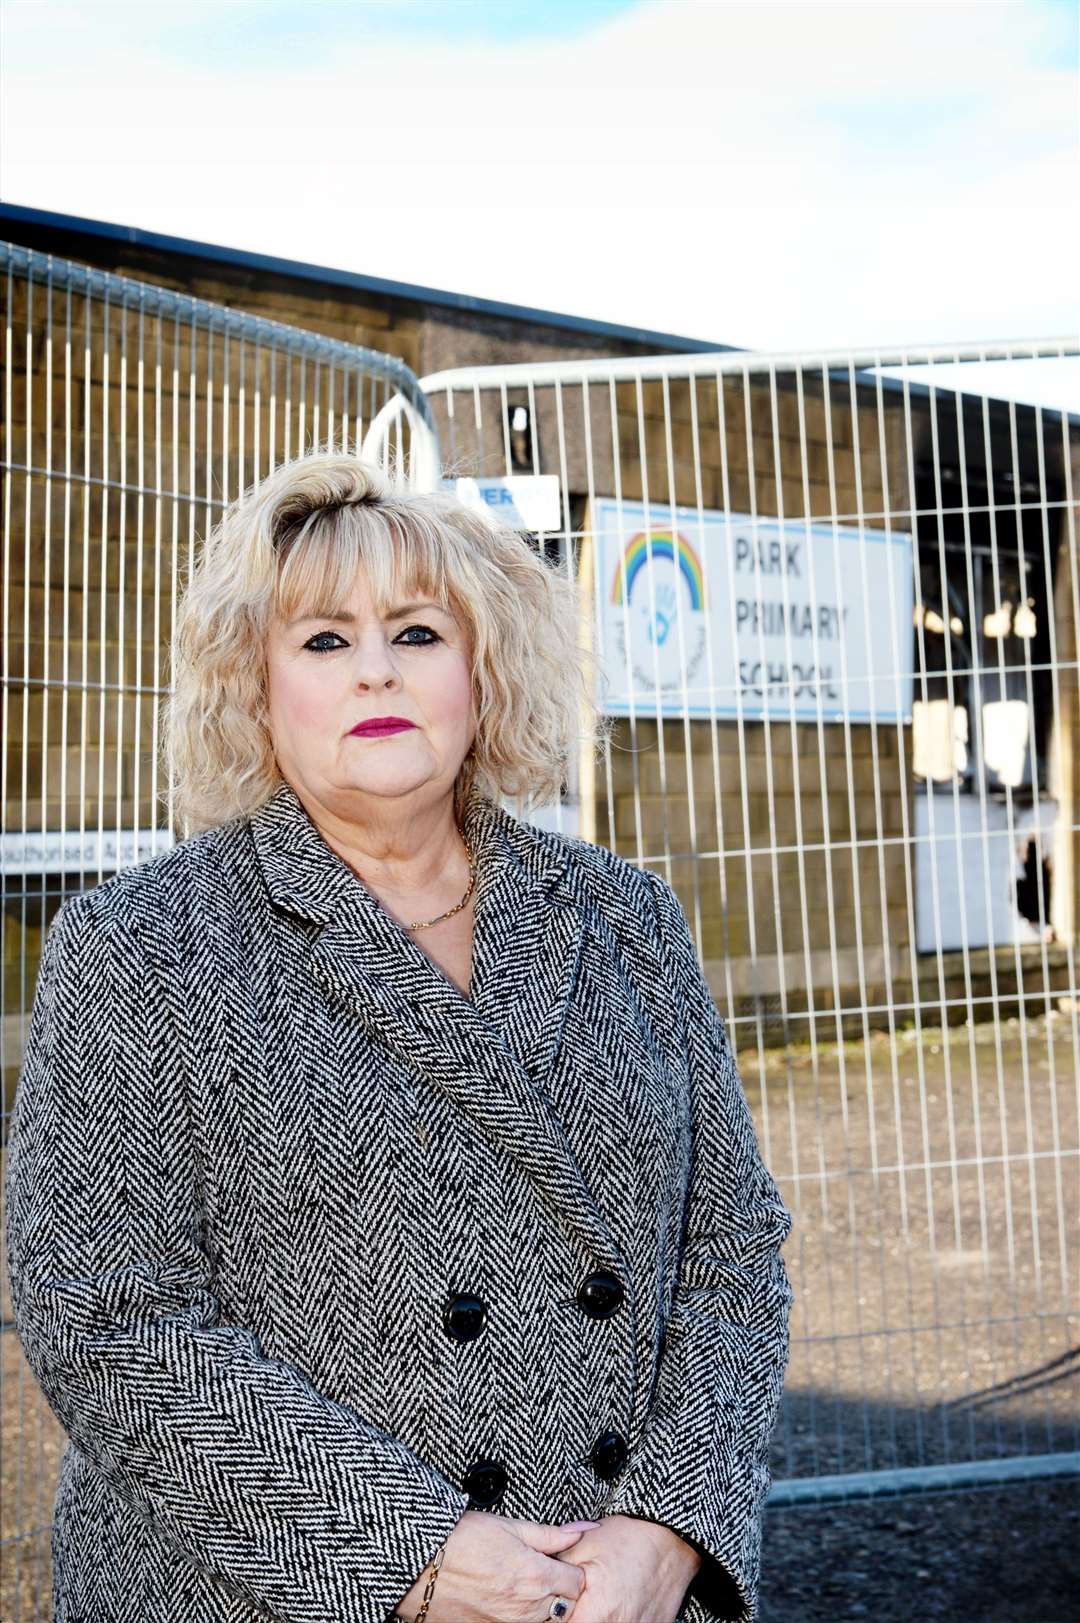 Cllr Maxine Smith outside Park Primary School – one issue that brought her into conflict with Cllr Tamala Collier. Picture: James MacKenzie.